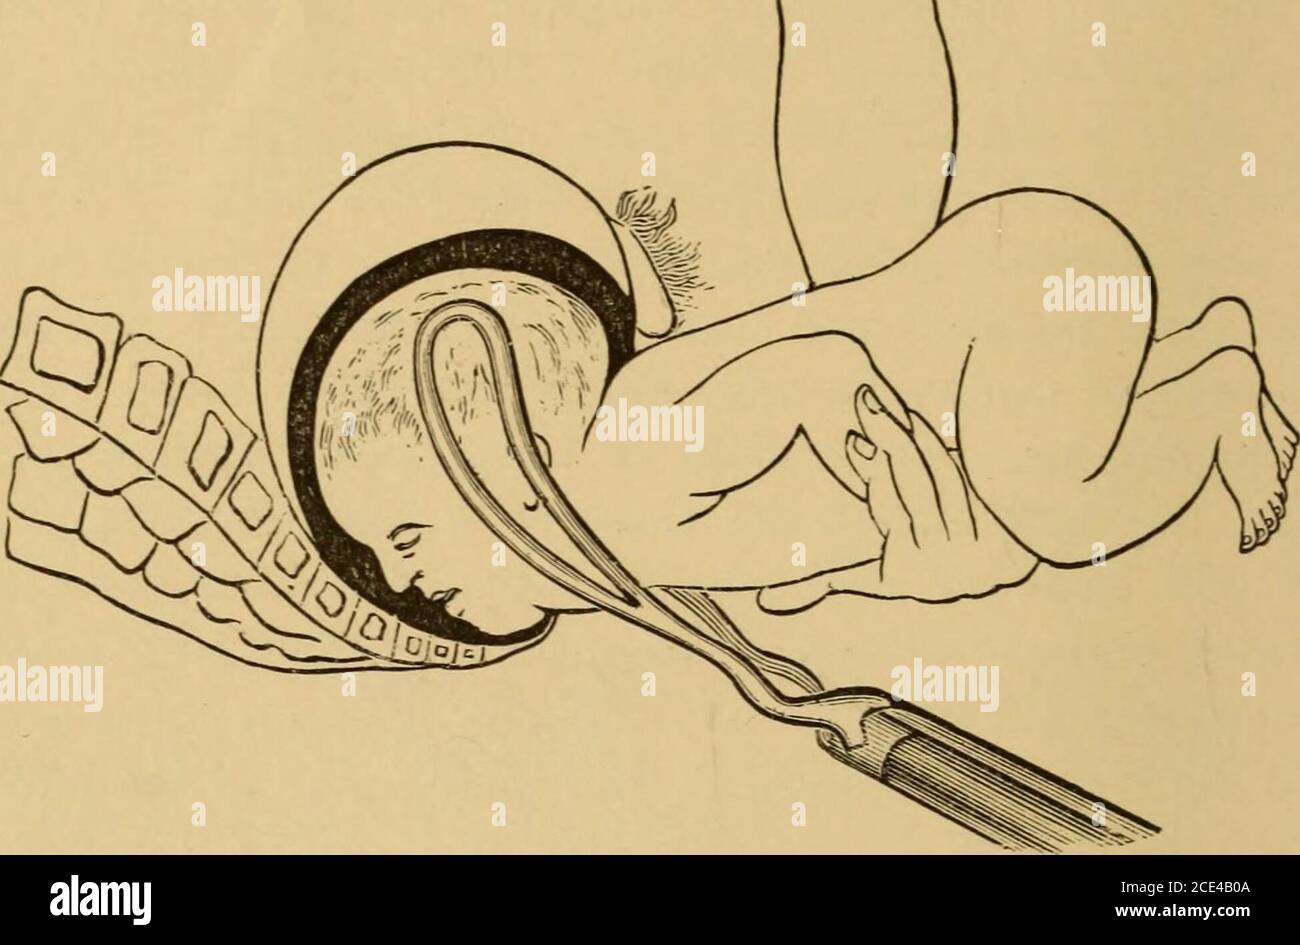 . A system of obstetrics . Practically, the blades do not grasp the head exactly in its antero-p rterior diam-eter, hut in an oblique direction intermediate between the antero-posterior and transvi ree. 1 h is argued by the advocates of iliis plan thai lateral compression is more apt (•&gt;overcome disproportion by increasing the sntero-poeterior measurements at the expense&lt;it i he lateral, and that compression sntero-posteriorly is apt t increase the dispropor-tion by bulging out the head laterally. Though theoretically plausible, practicallythis vim is incorrect; for experiments have abun Stock Photo